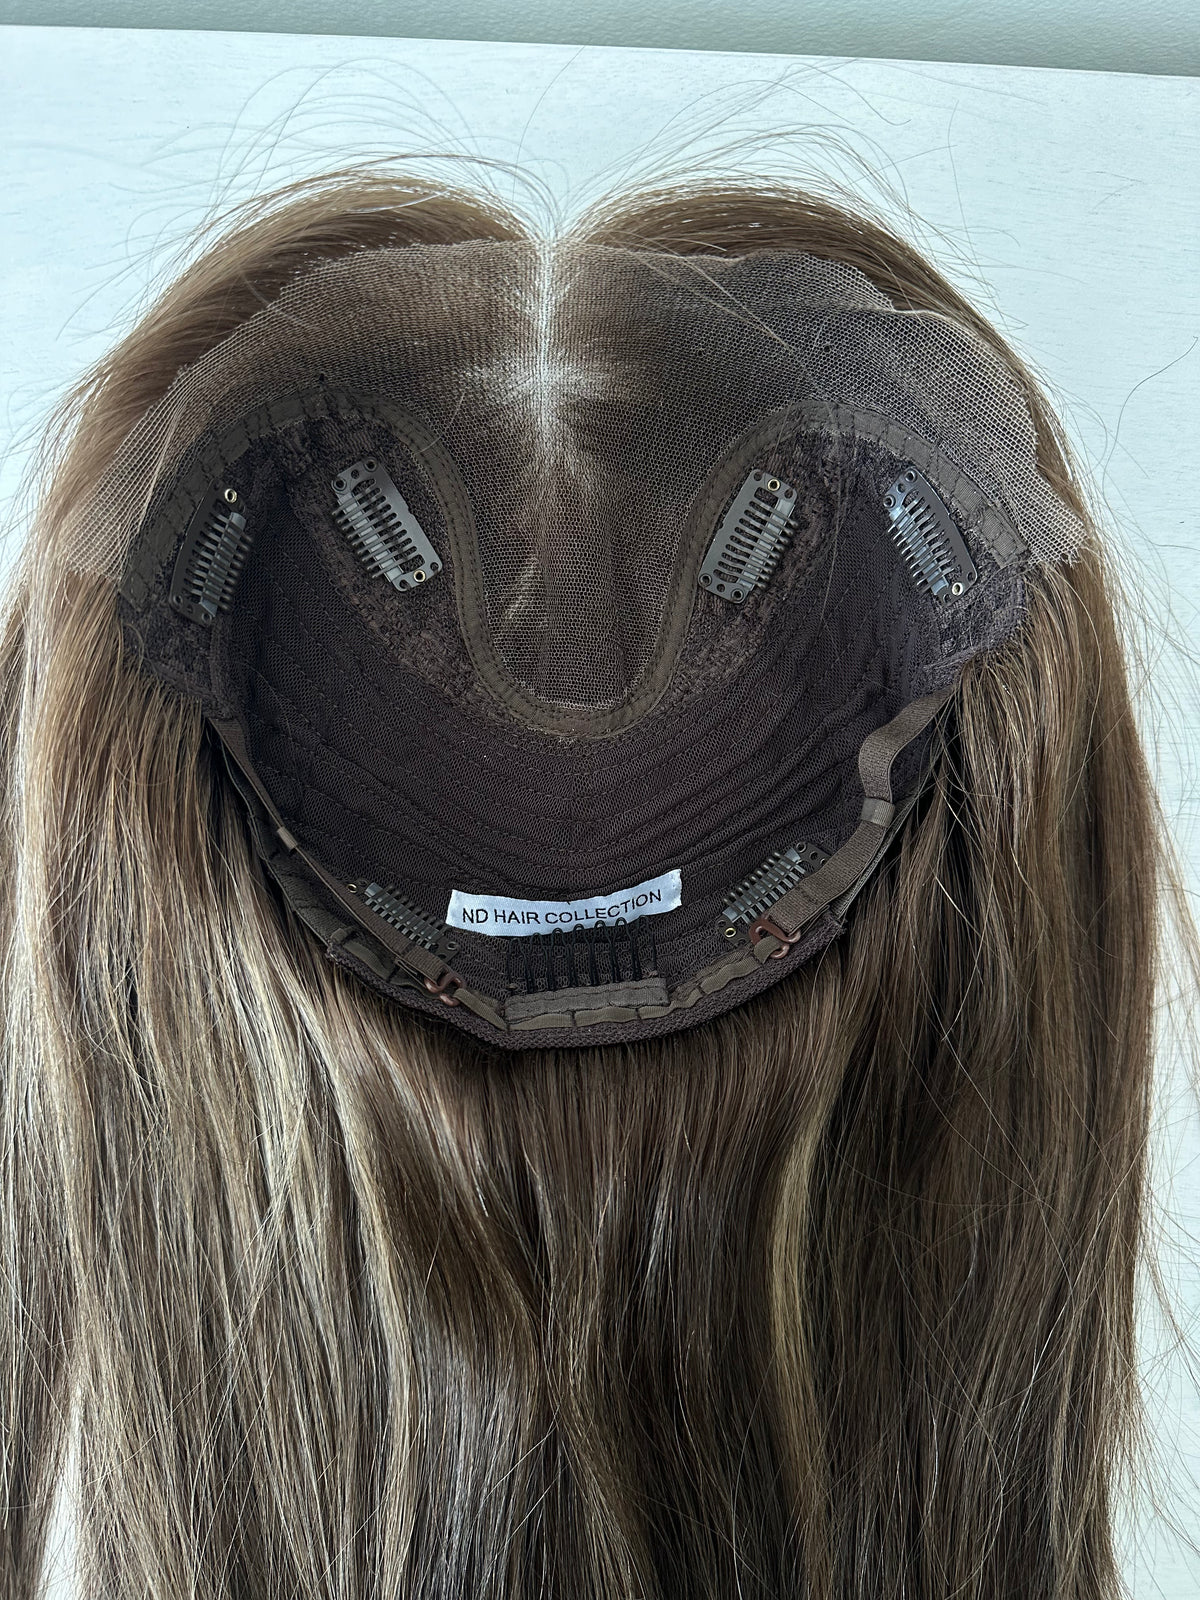 Sample, Warm Light brown with highlights, Lace top Hair Topper (10x10 cap / 18" length)